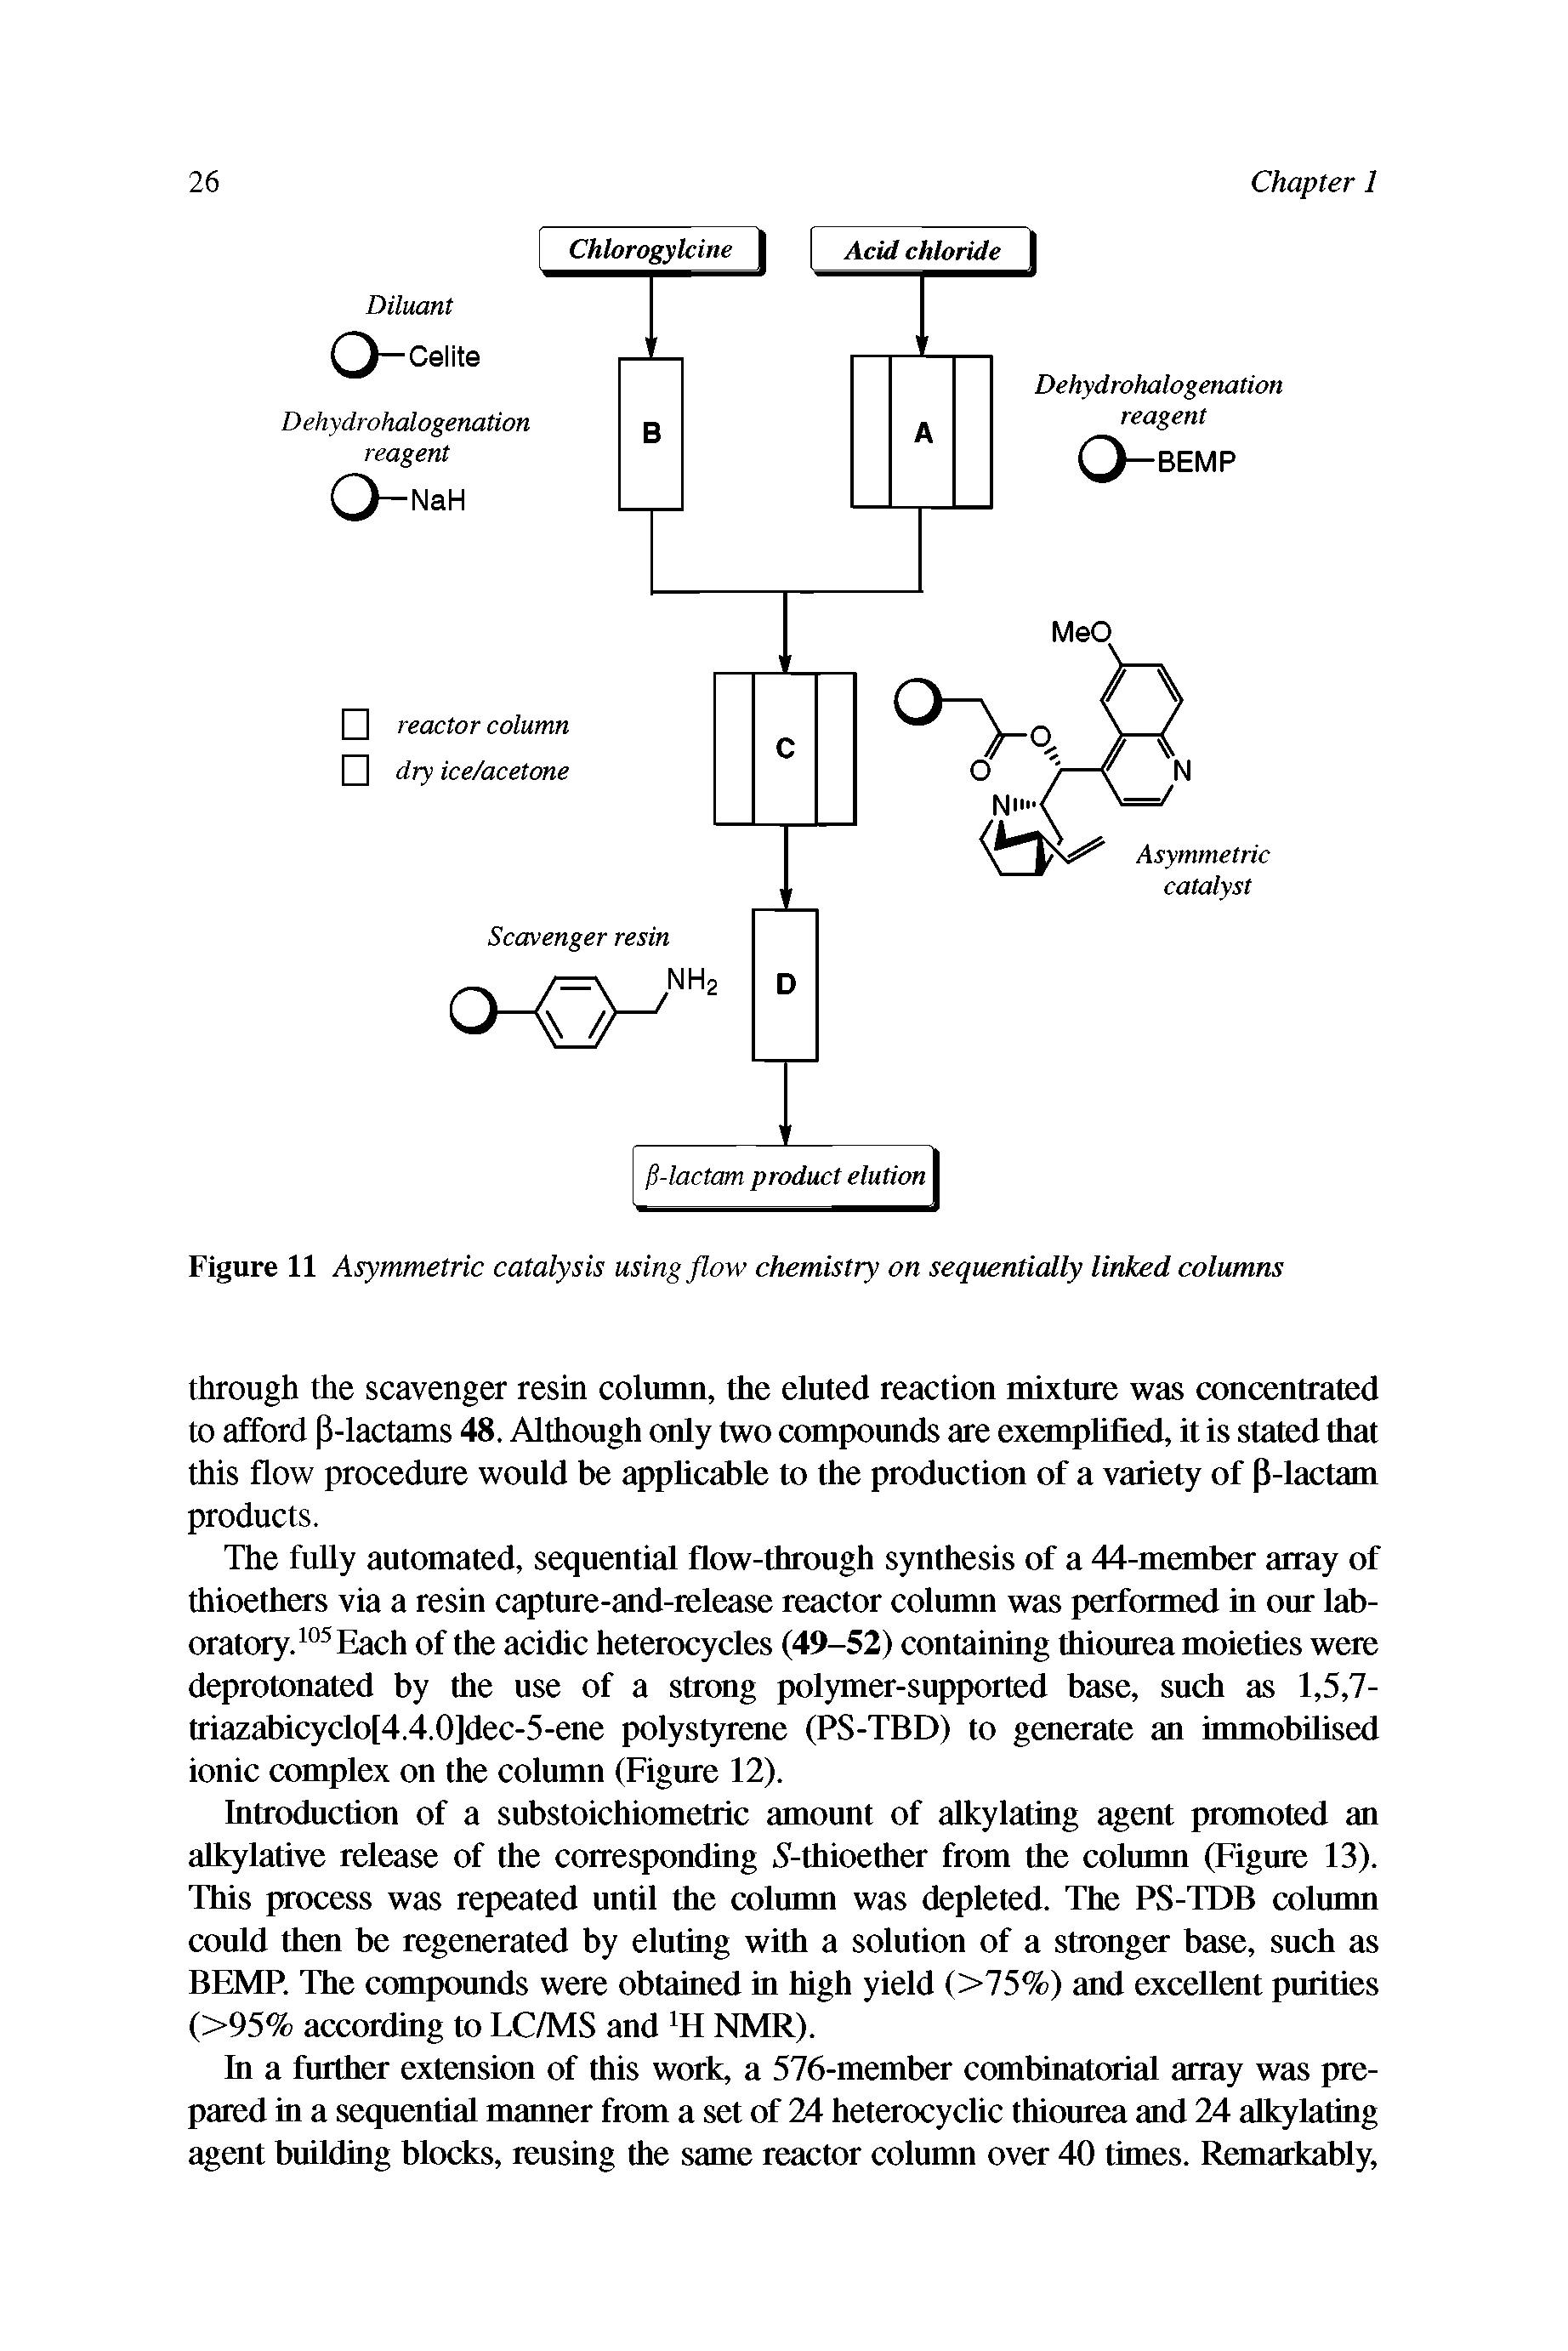 Figure 11 Asymmetric catalysis using flow chemistry on sequentially linked columns...